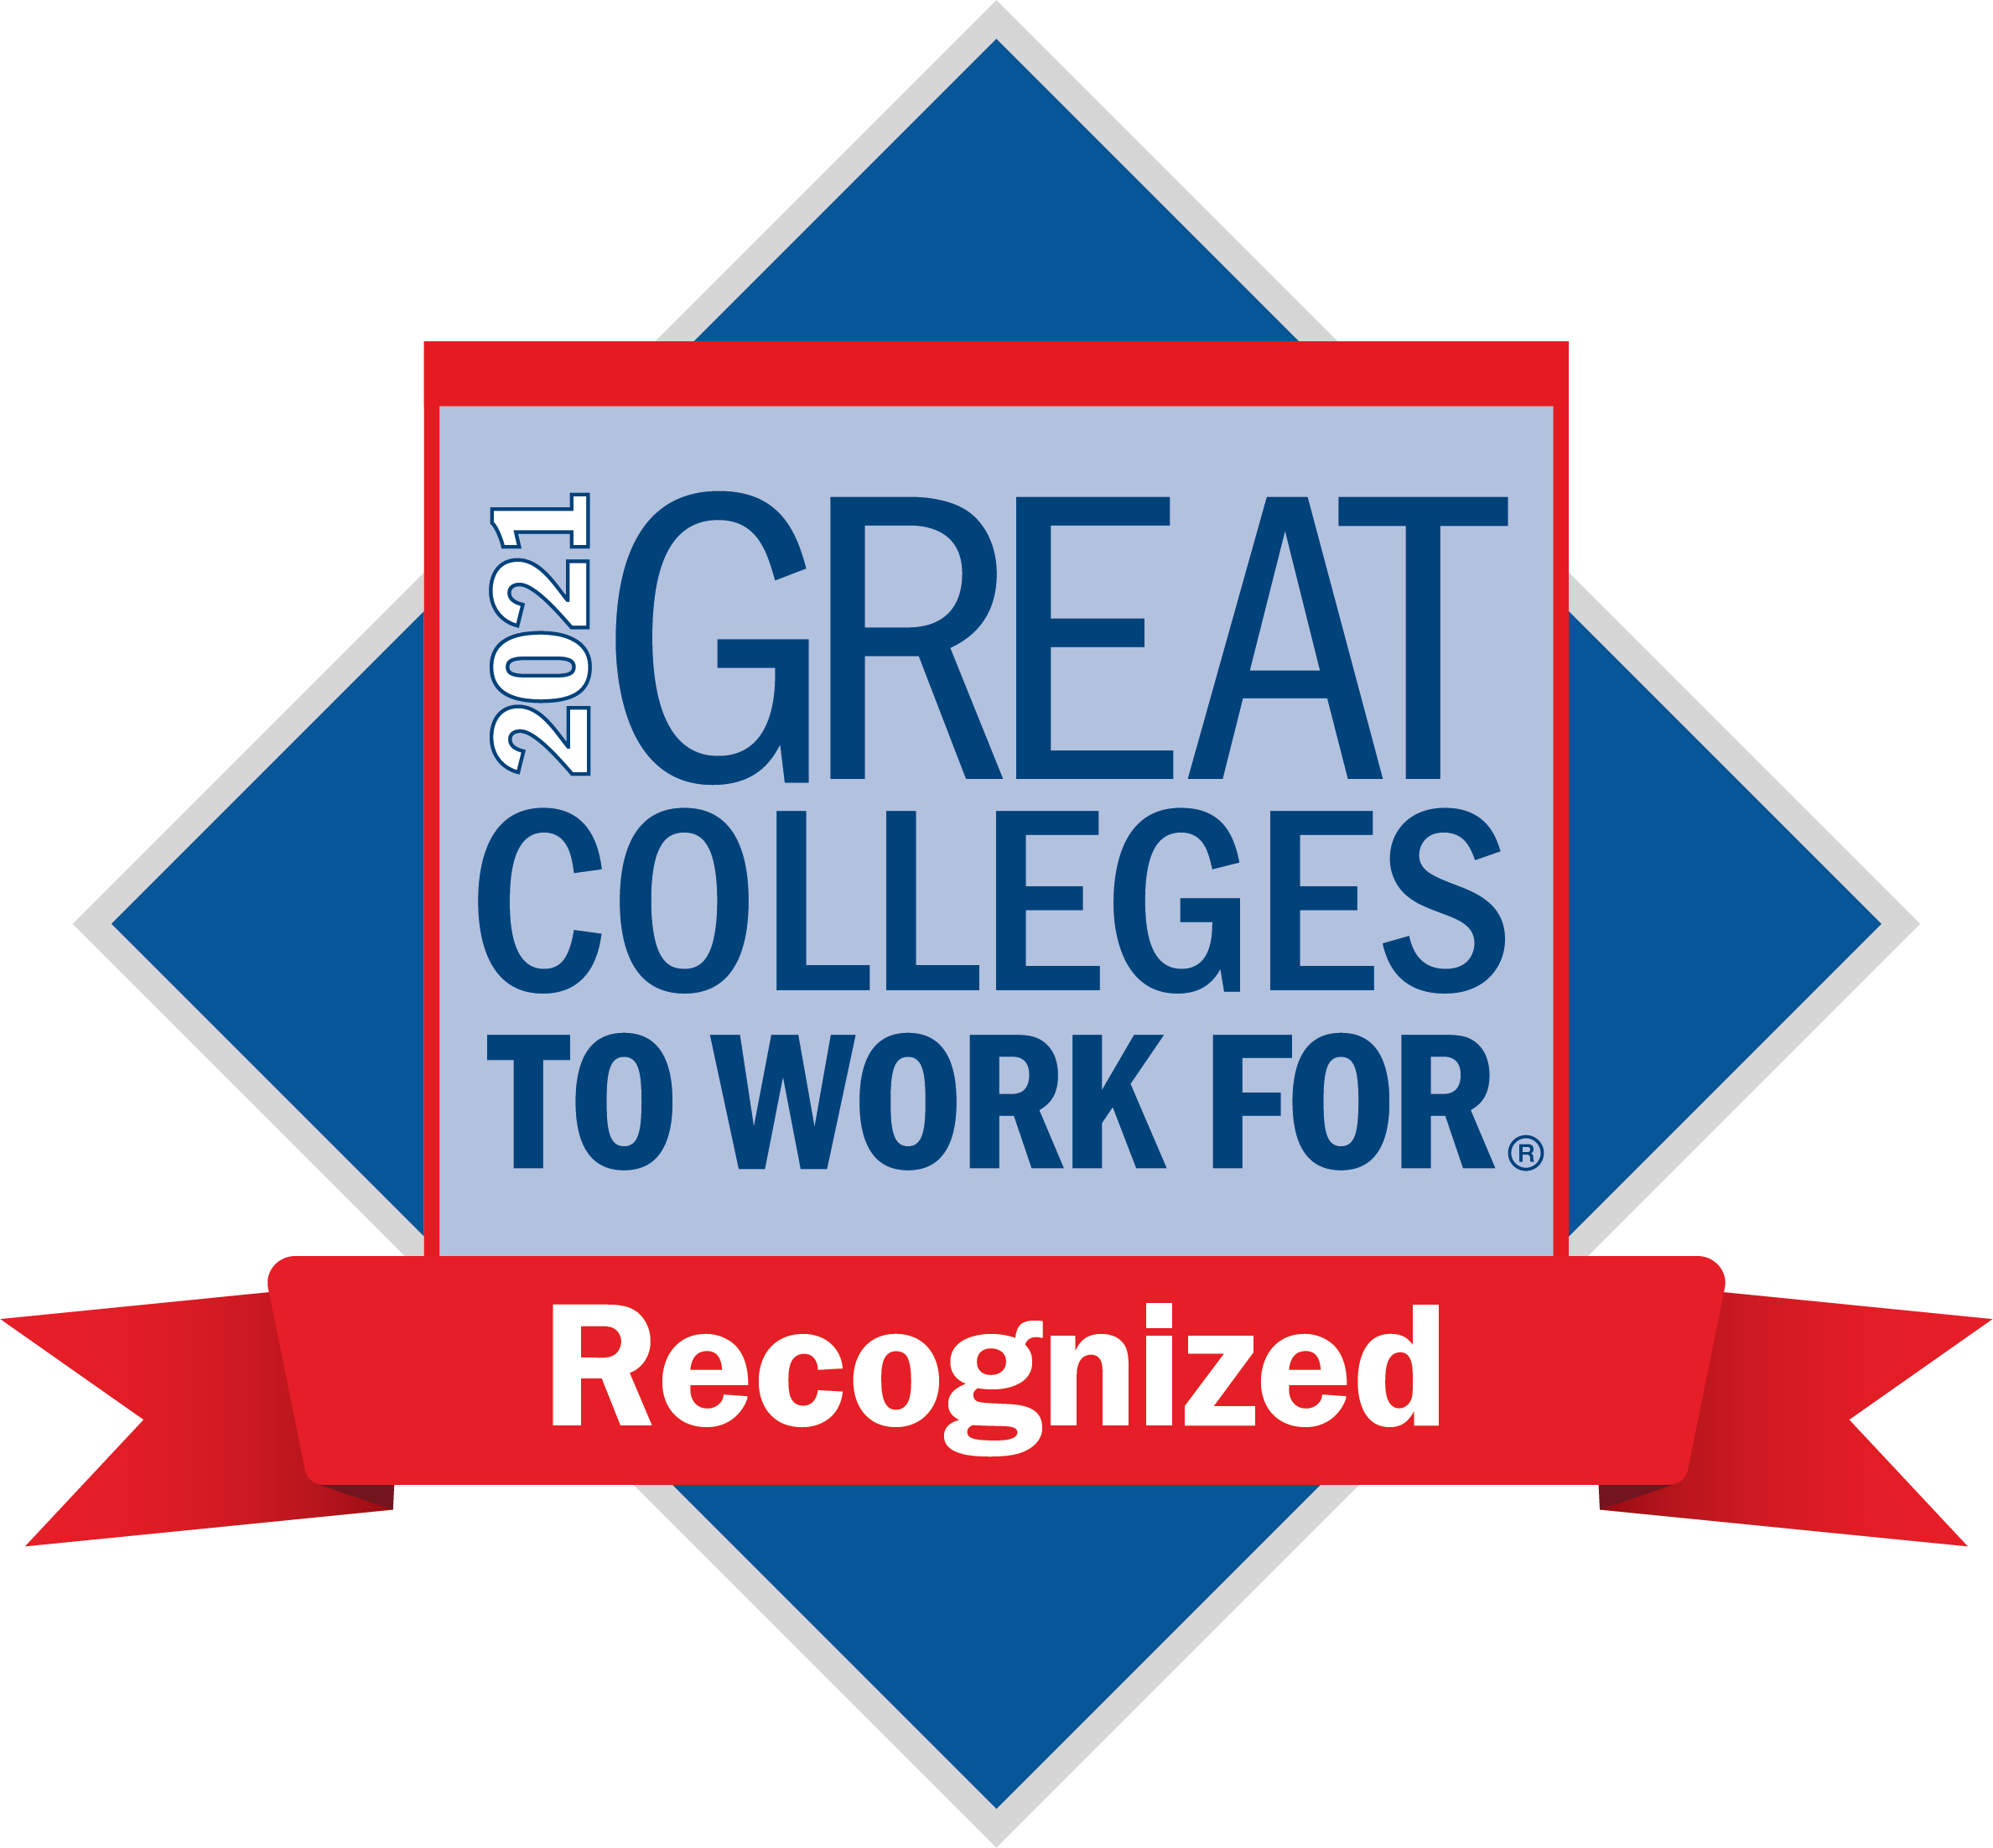 In 2021, TTUHSC was recognized as a great college to work for 